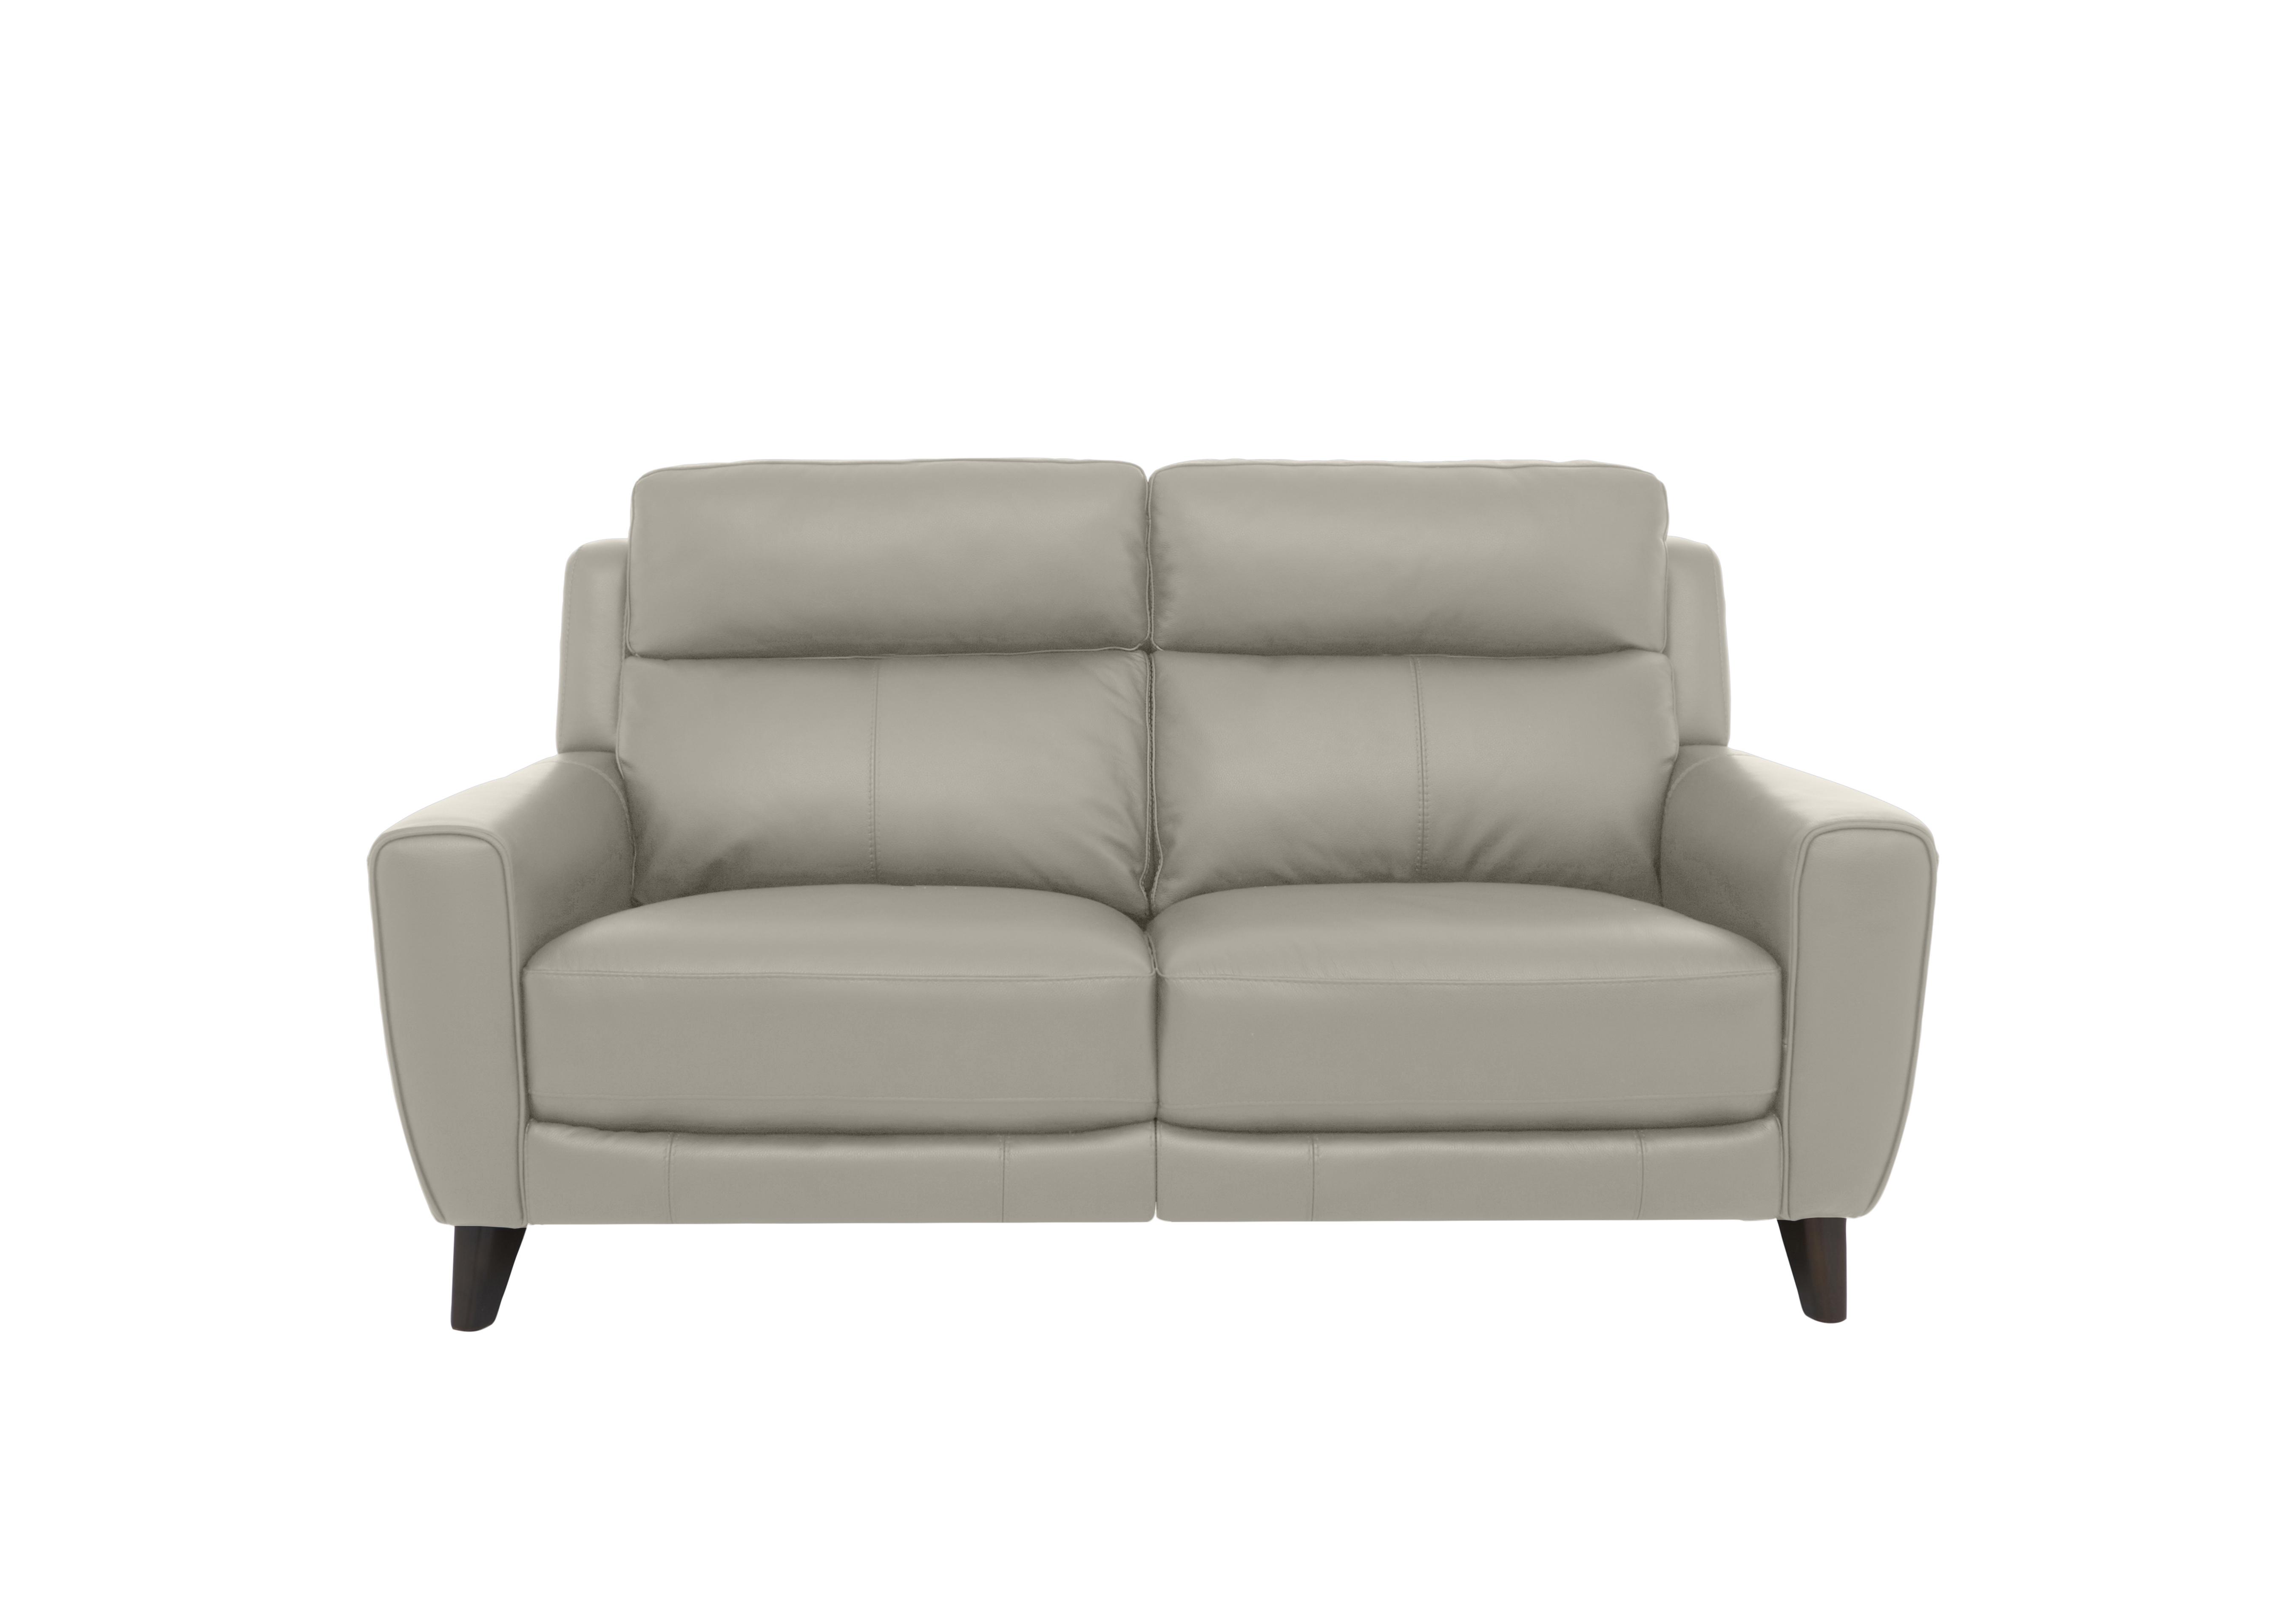 Zen 2 Seater Leather Sofa in Bx-251e Grey on Furniture Village